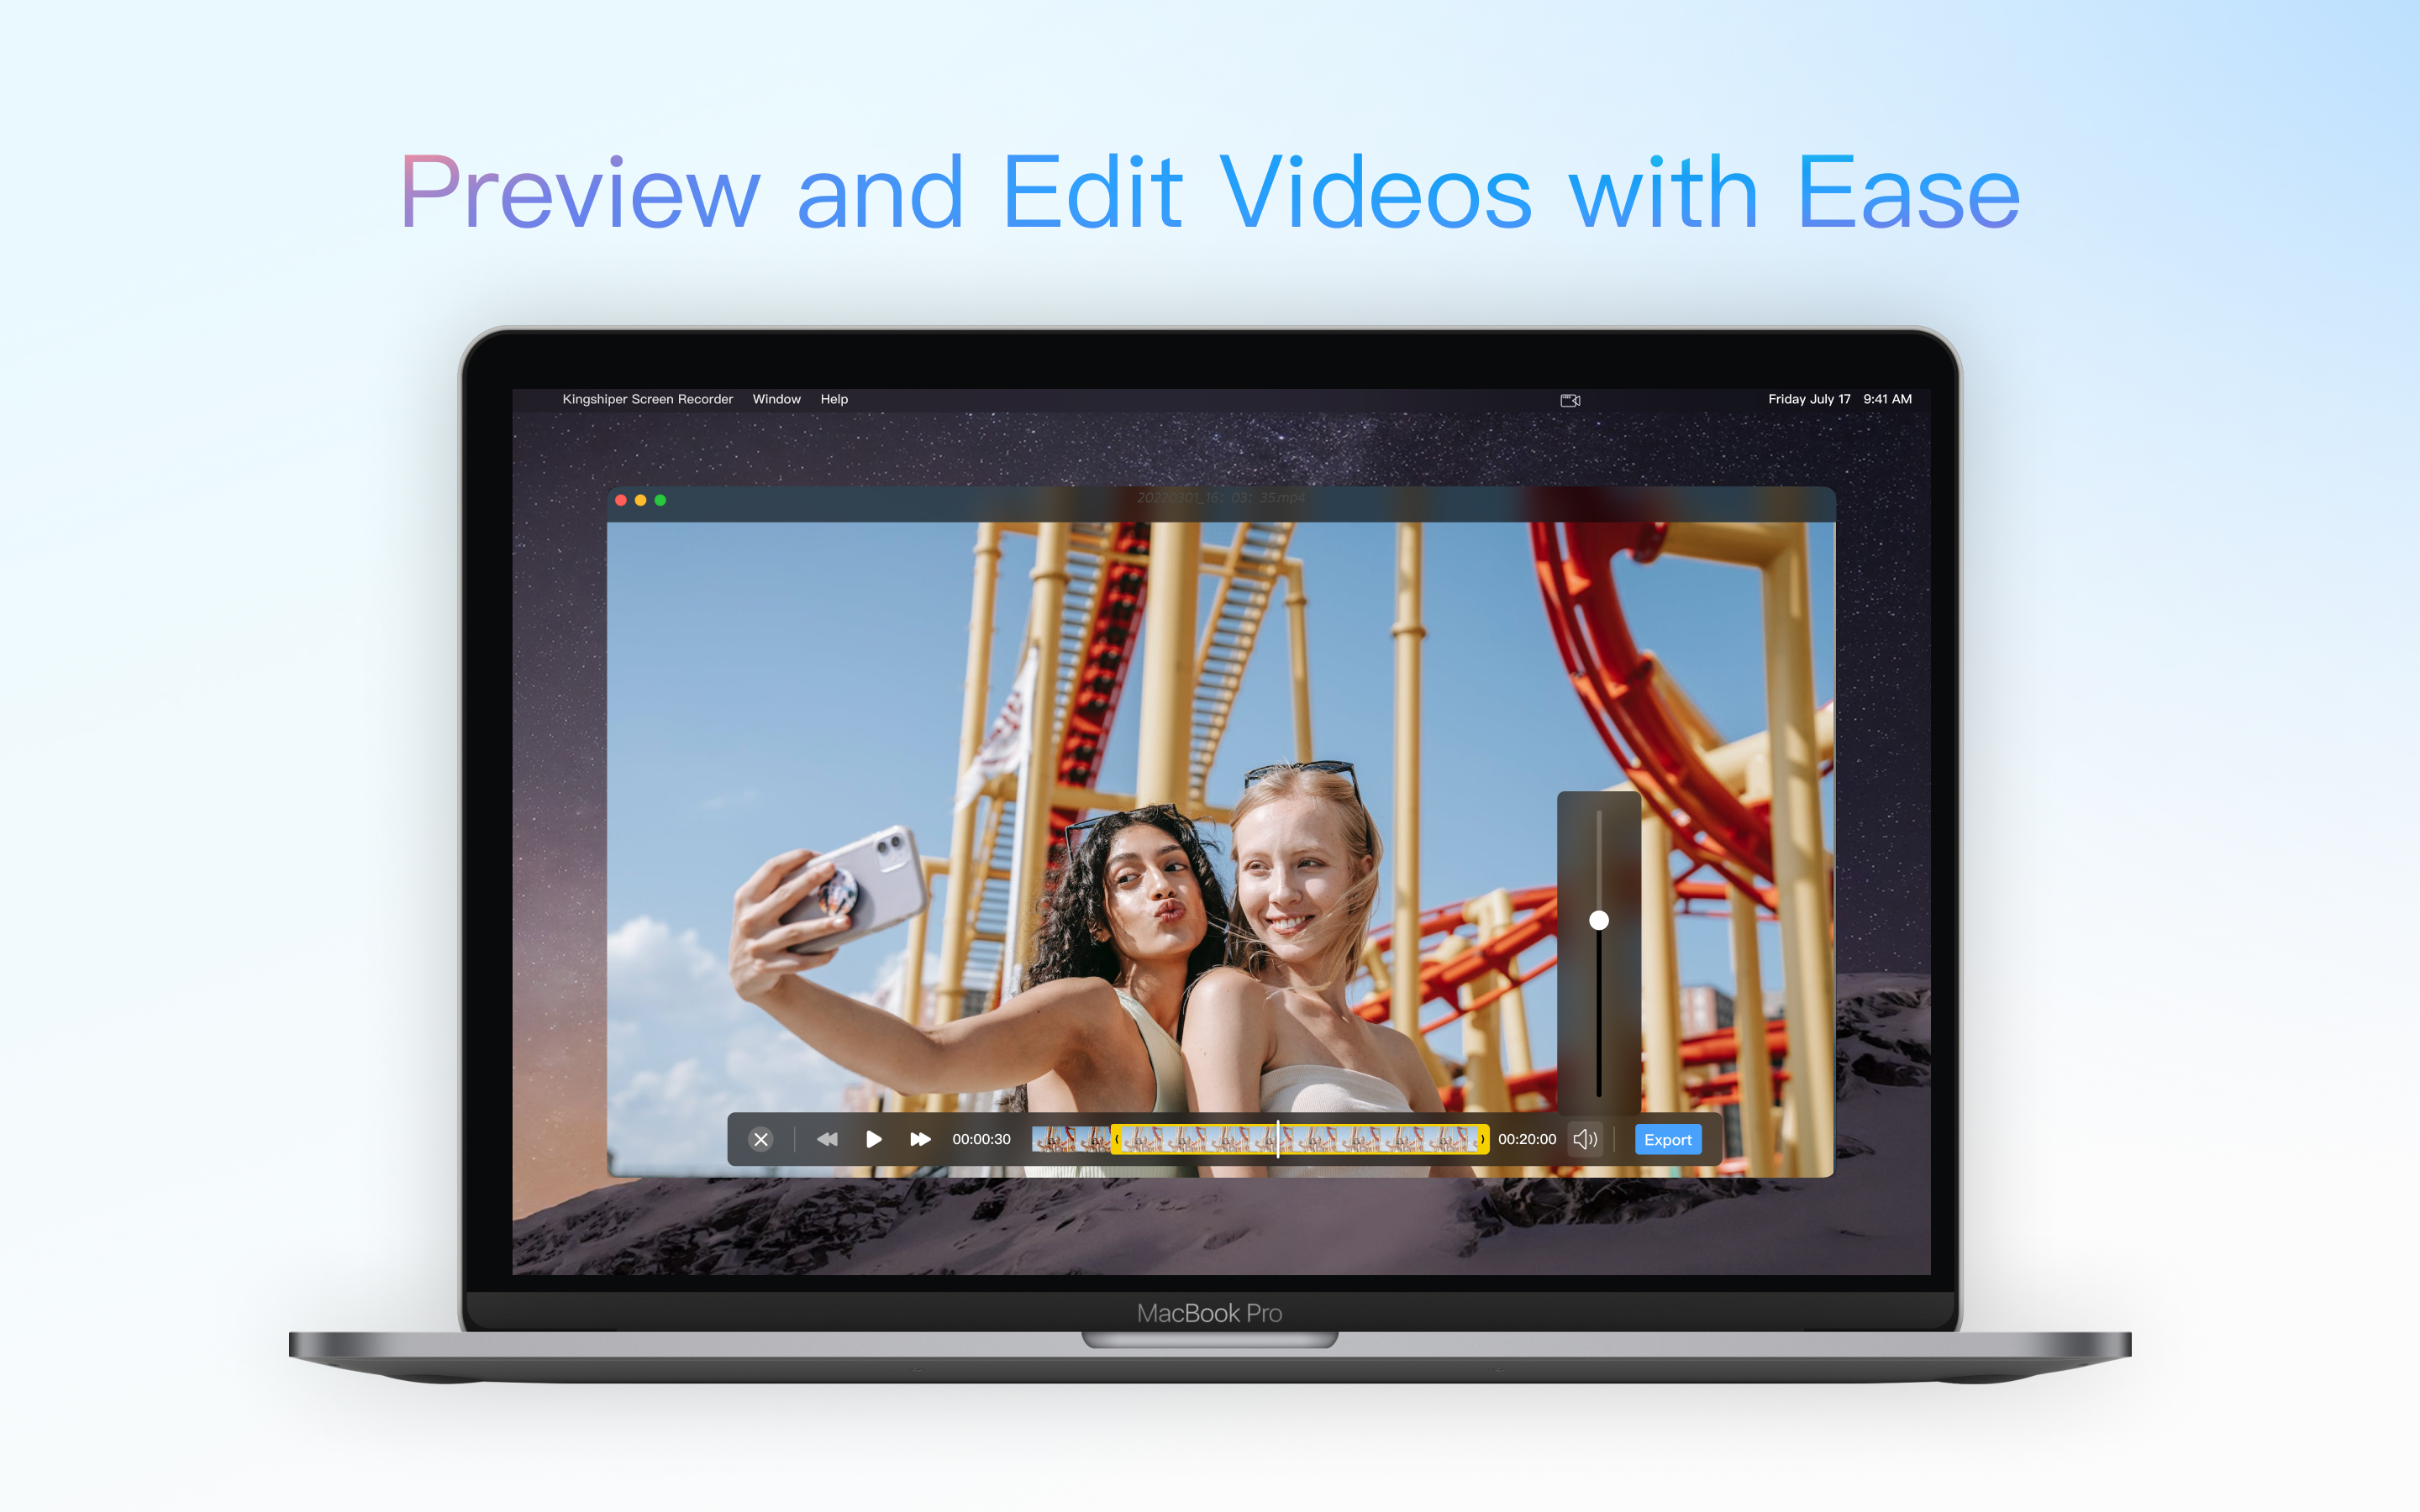 Preview and Edit Videos with Ease